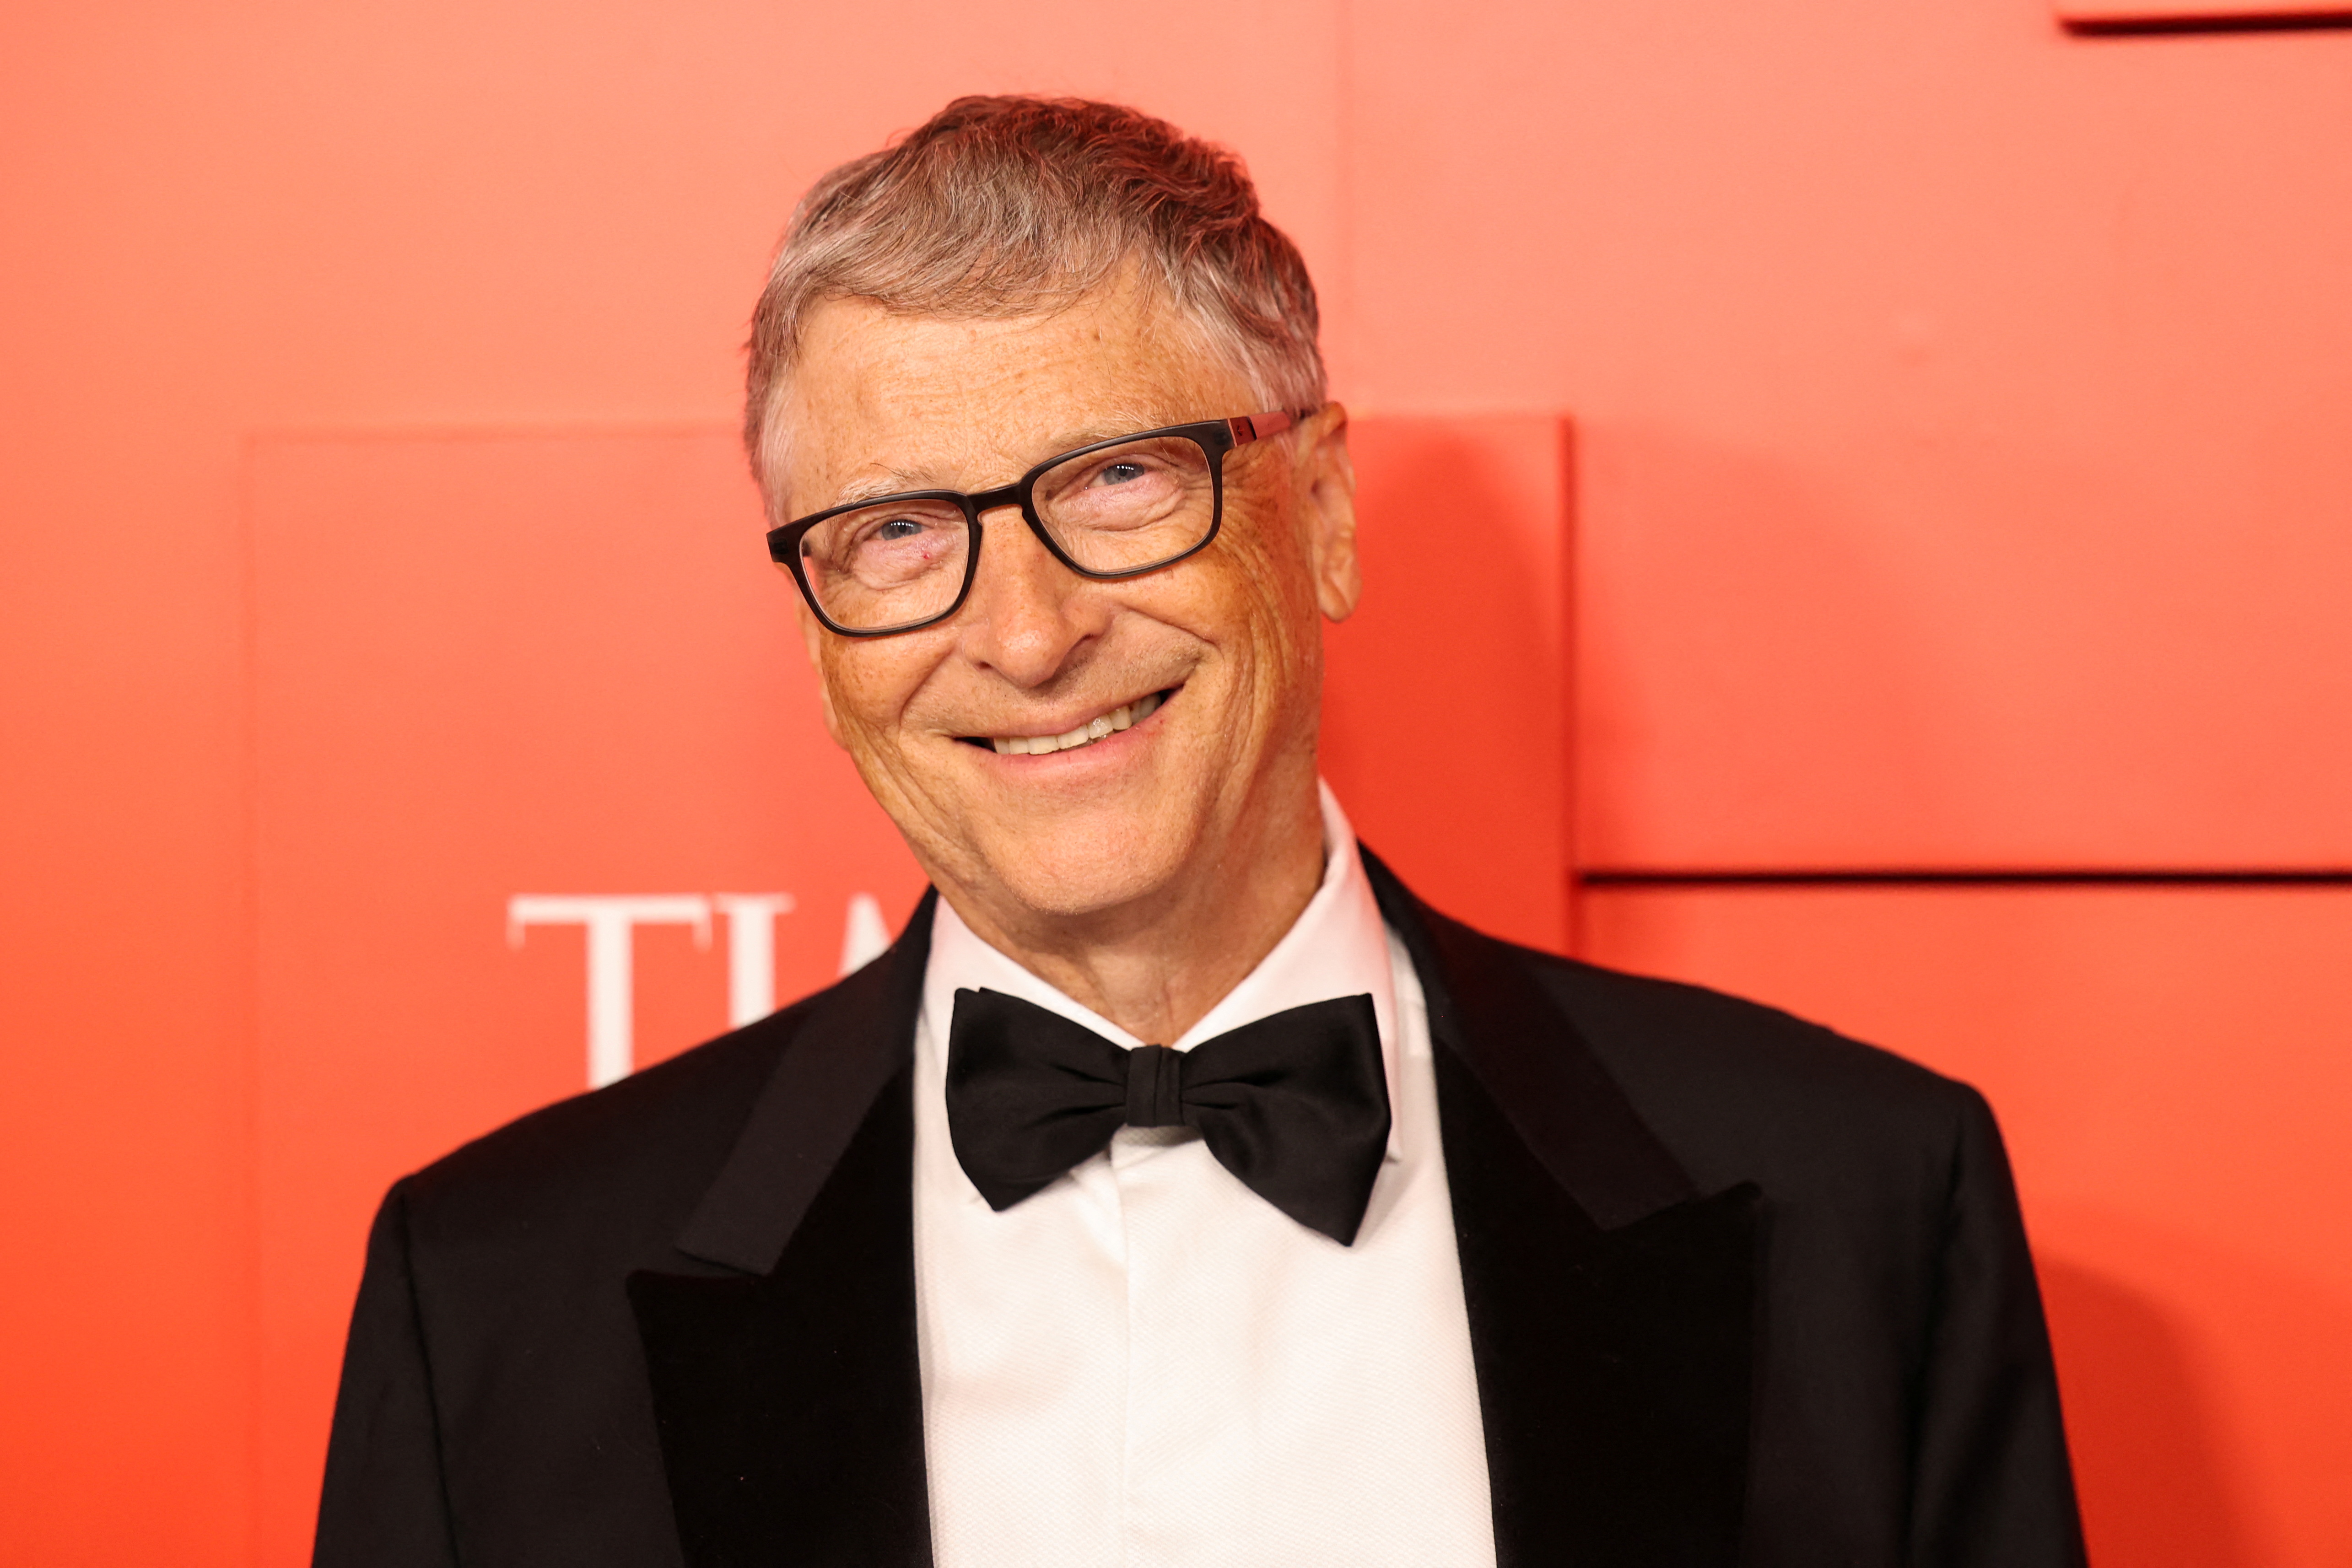 You have higher chance of getting hired than Bill Gates; proves his resume